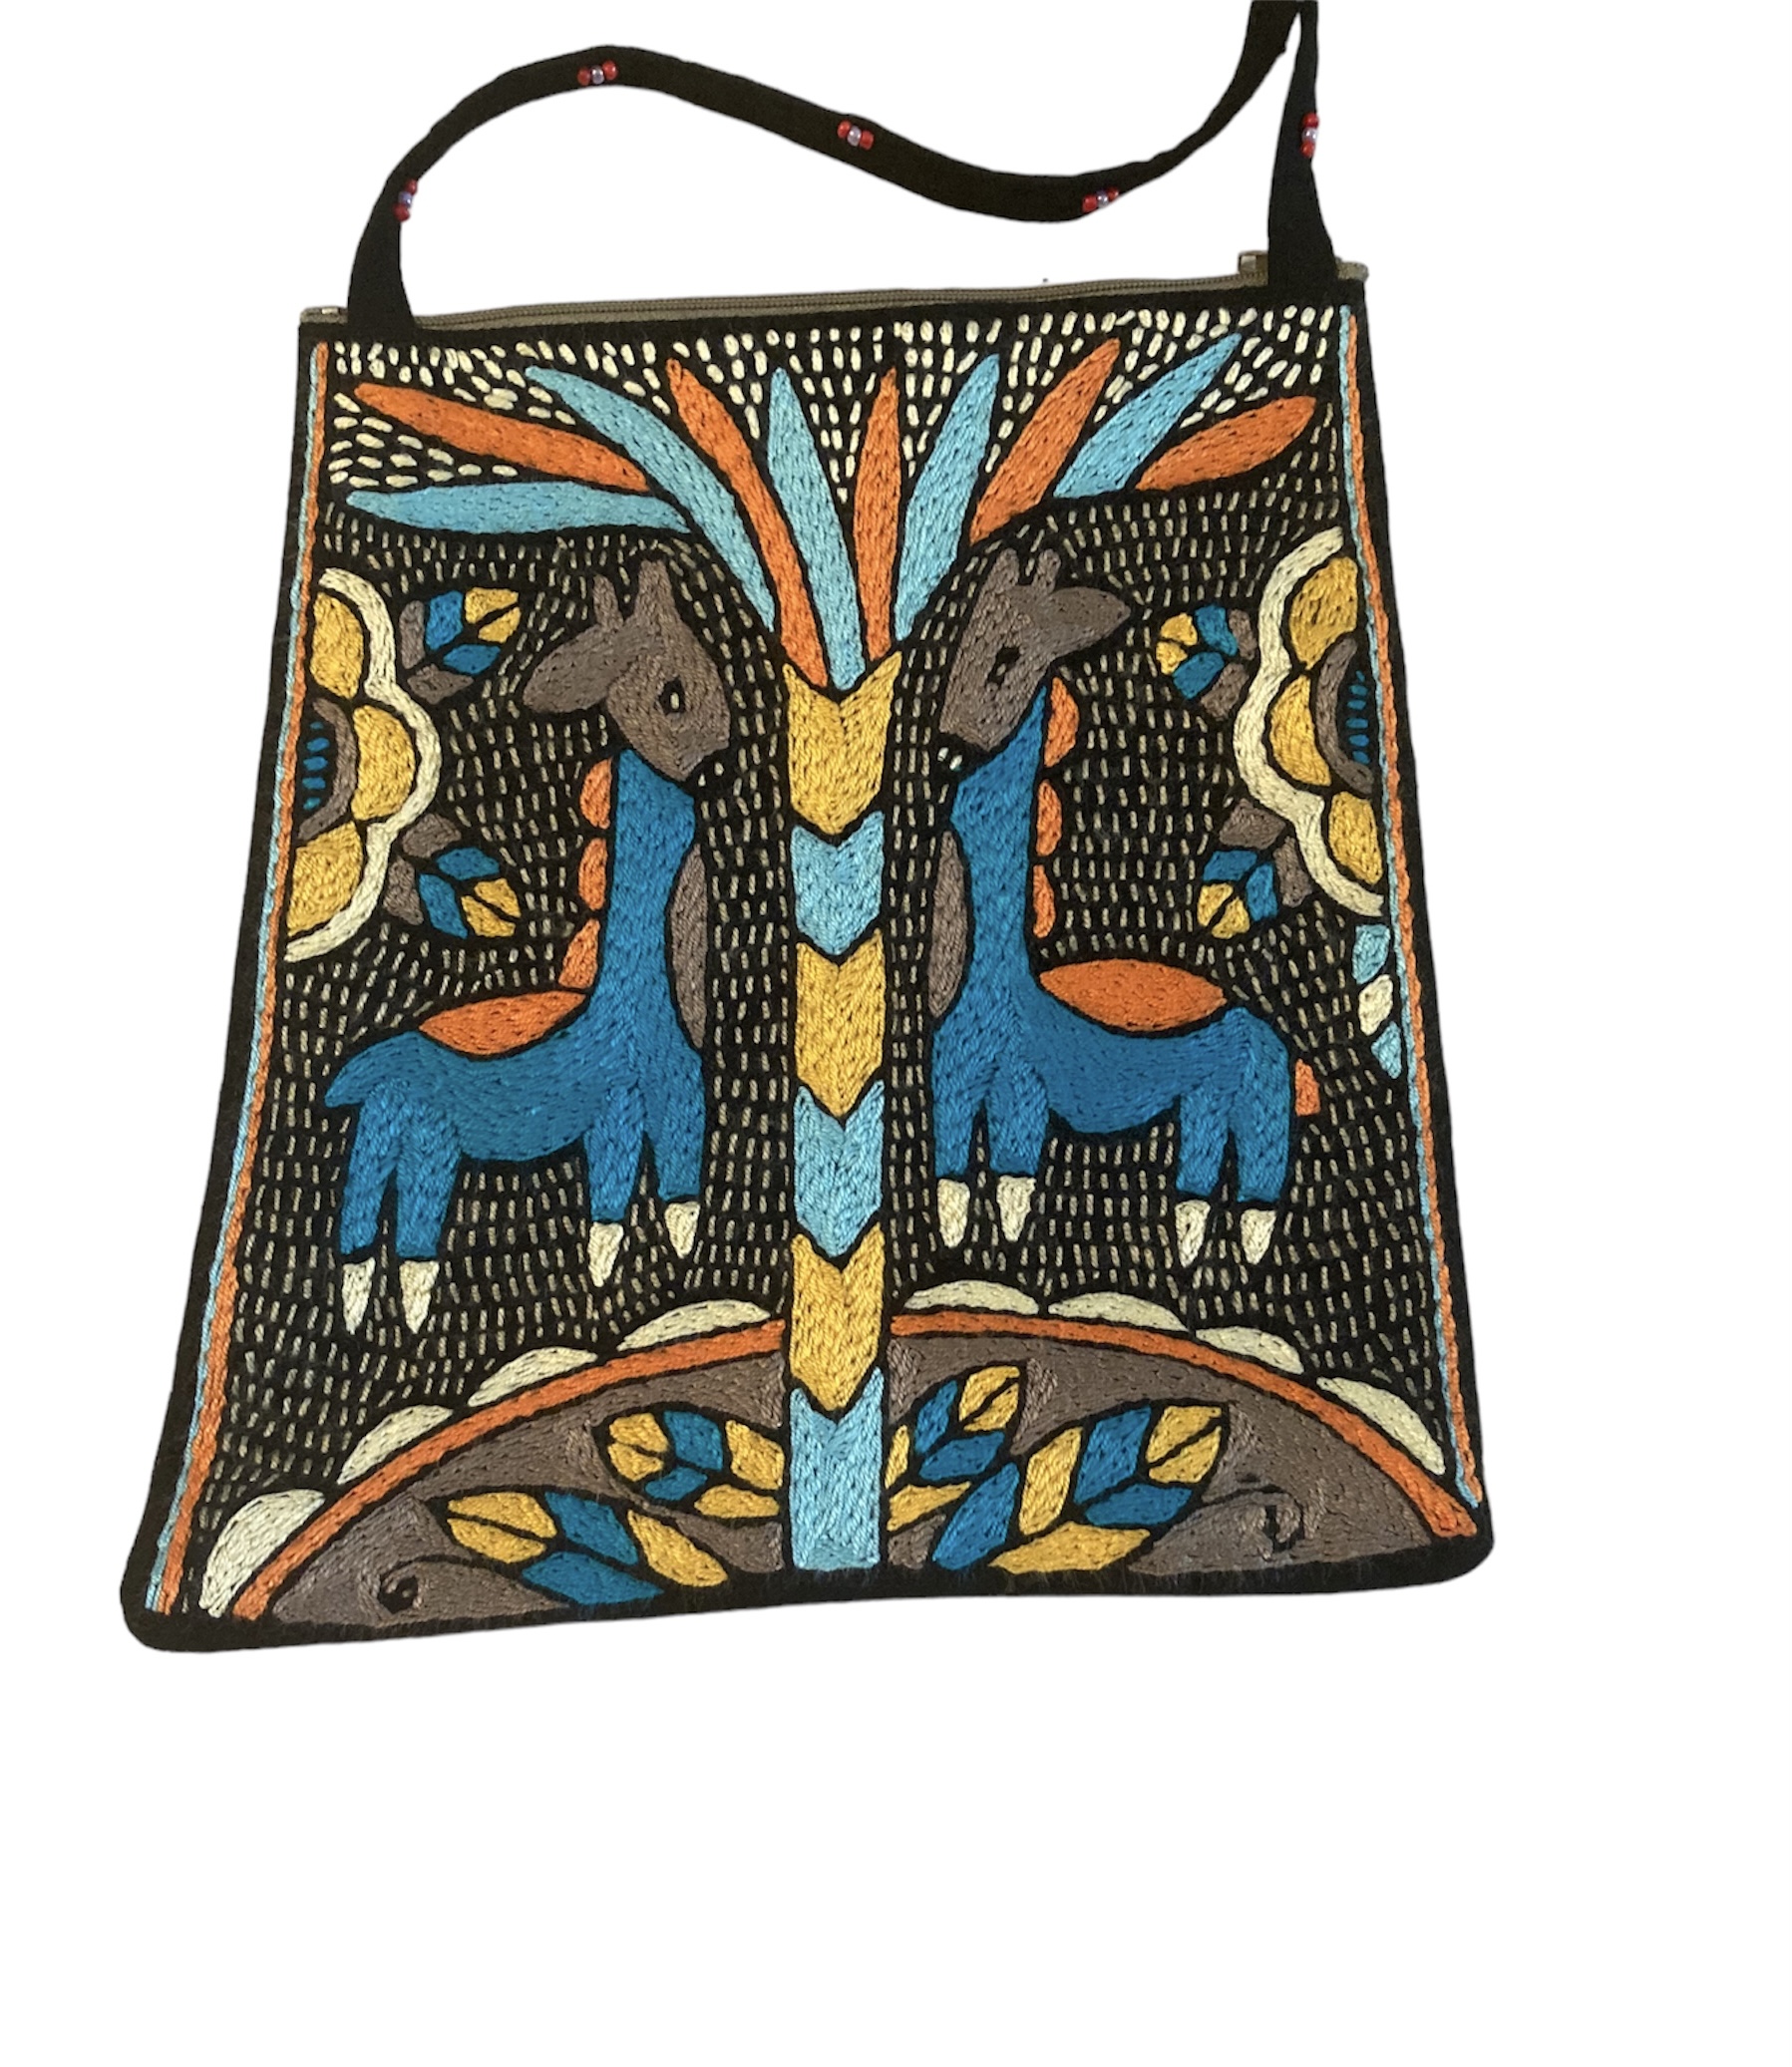 100% Hand-Embroidered Shangaan Purse #201905